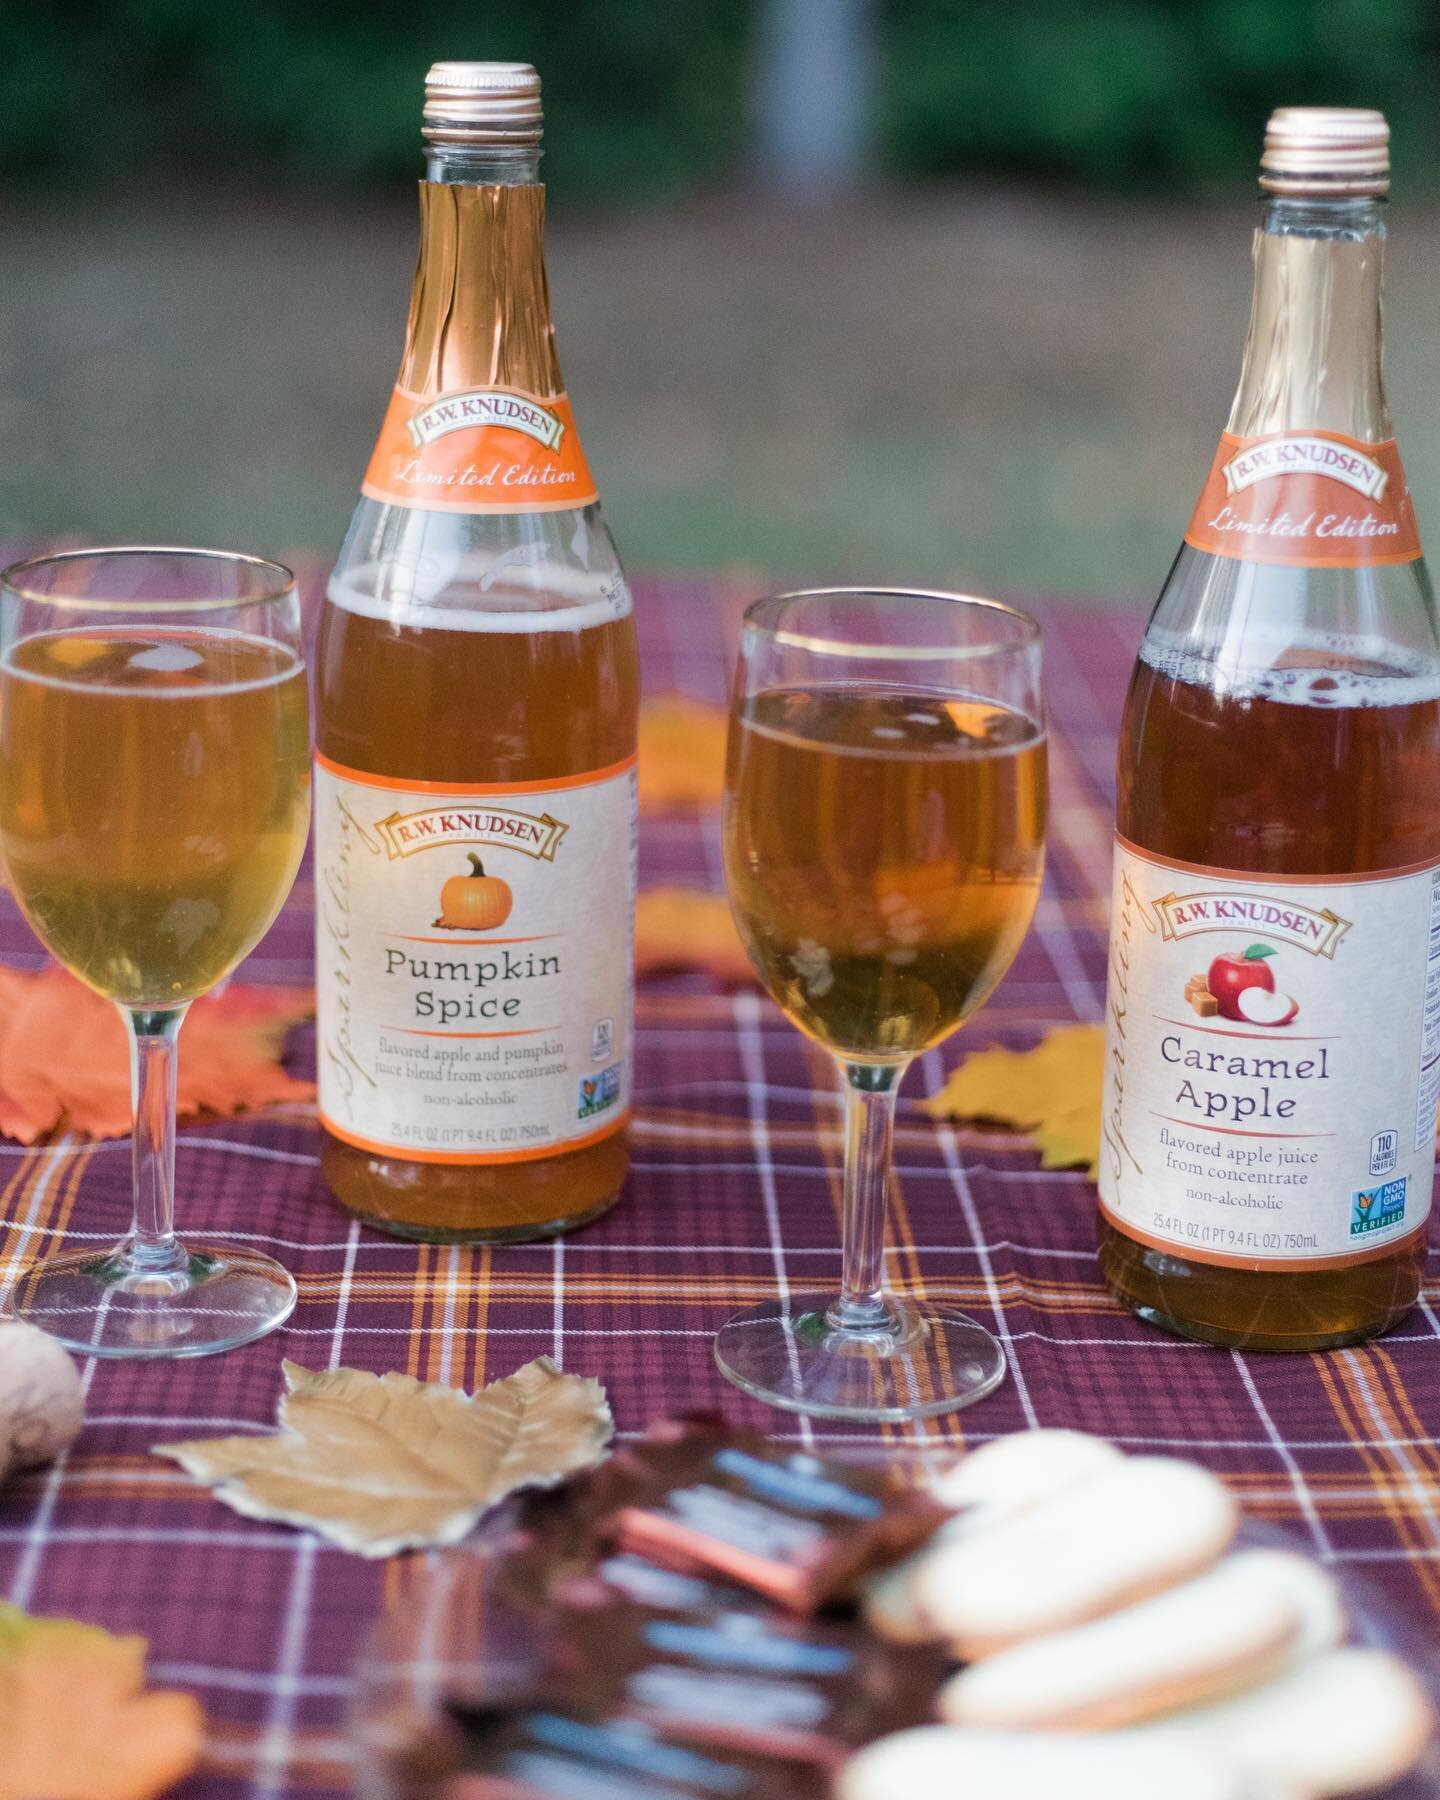 Pumpkin spice mimosas, anyone? 🎃🥂 I&rsquo;m 3 weeks in on a month-long detox but you can bet that next weekend Kendall and I will be having a fall-themed date night together, complete with my favorite fall-mosas! 🍁🍾🍂🧡 I love these sparkling cid